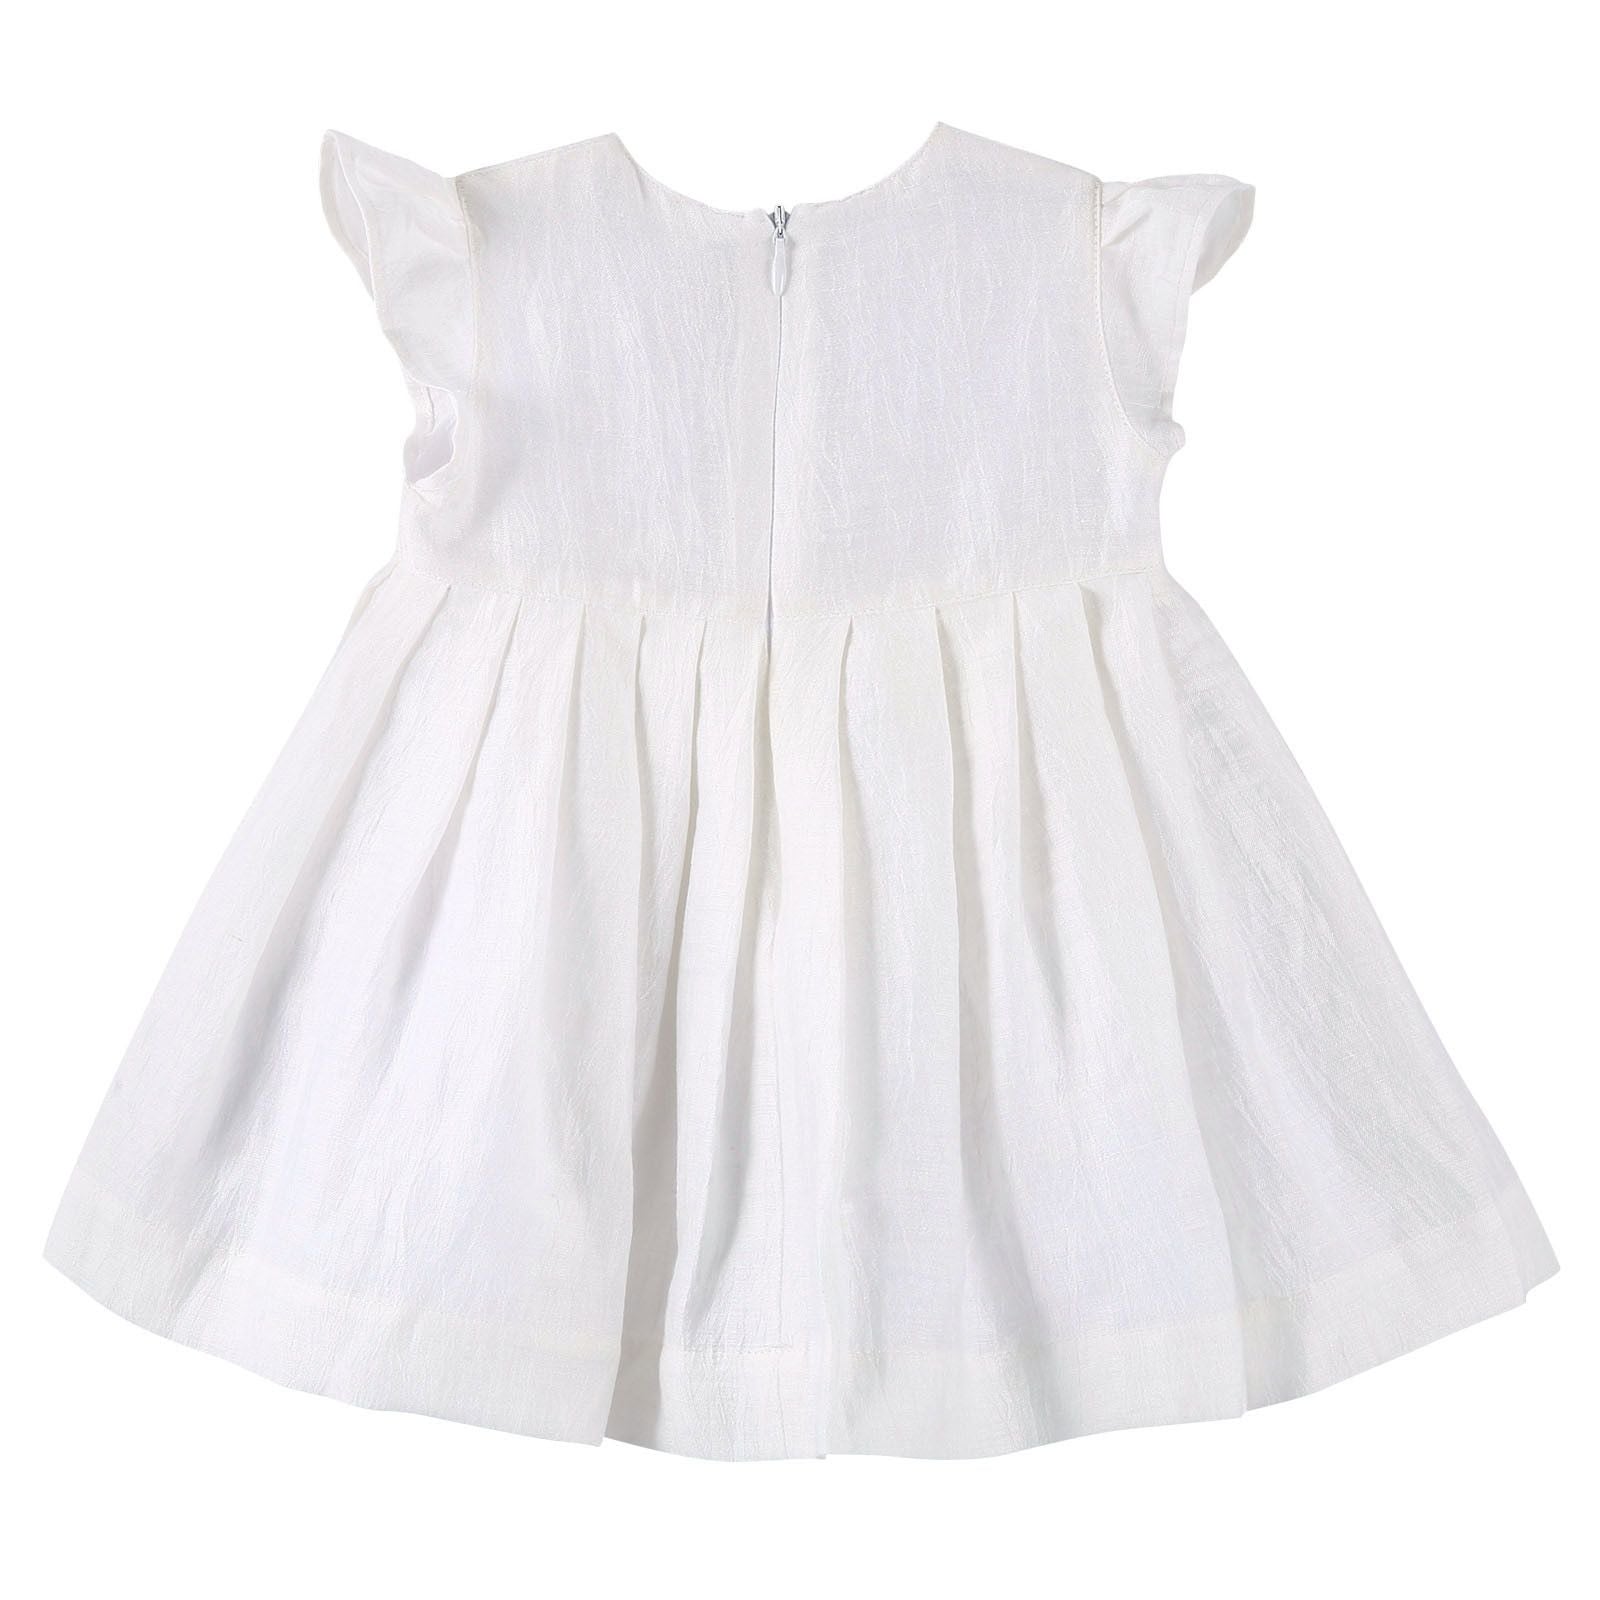 Baby Girls Ivory Dress With Pink Butterfly Patch Trims - CÉMAROSE | Children's Fashion Store - 2